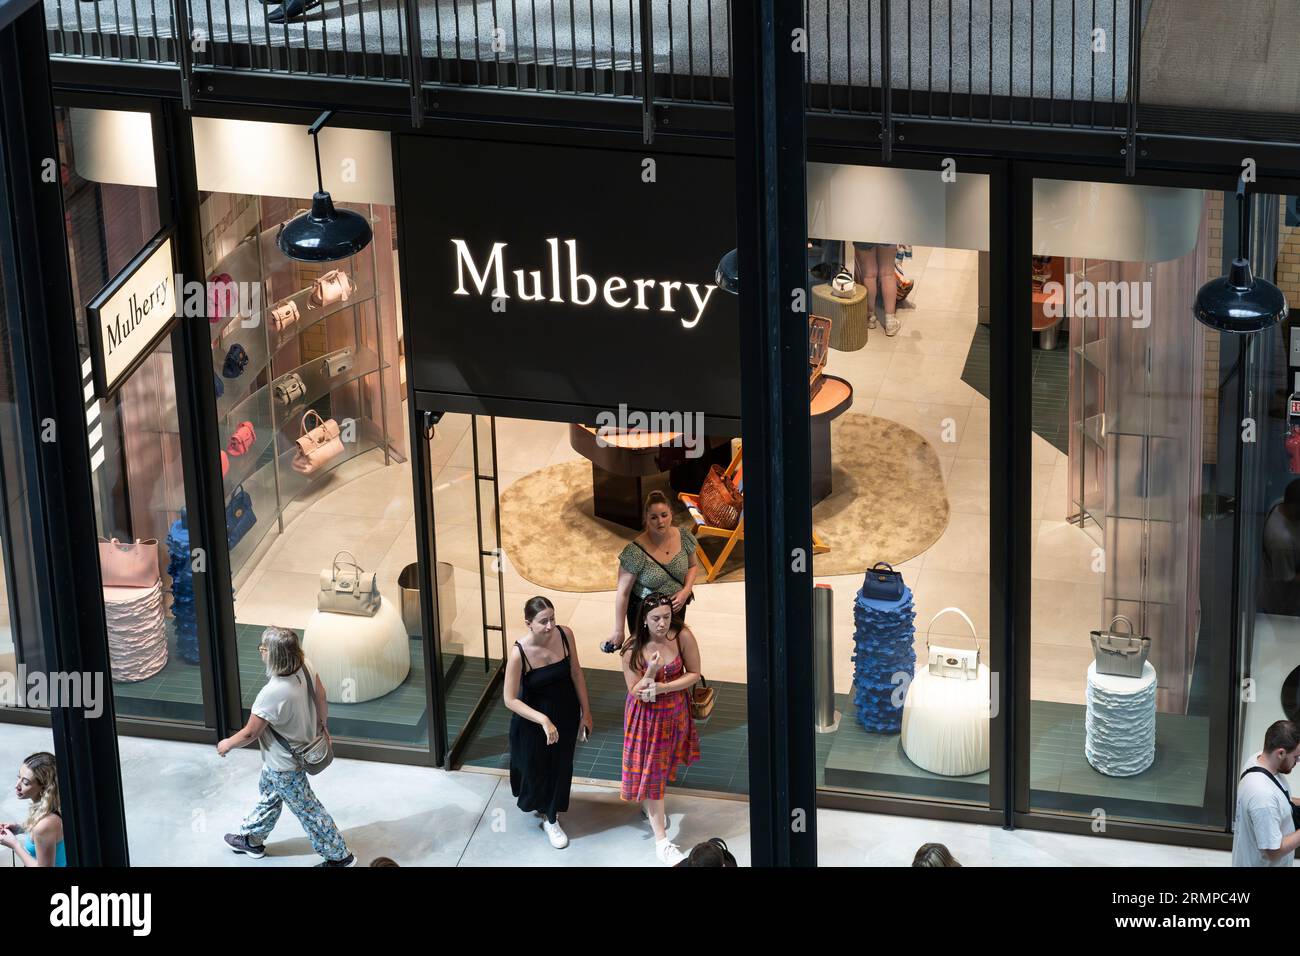 Shoppers browsing in a Mulberry outlet store in Turbine Hall A within the refurbed Grade II* listed Battersea Power Station in London, England Stock Photo